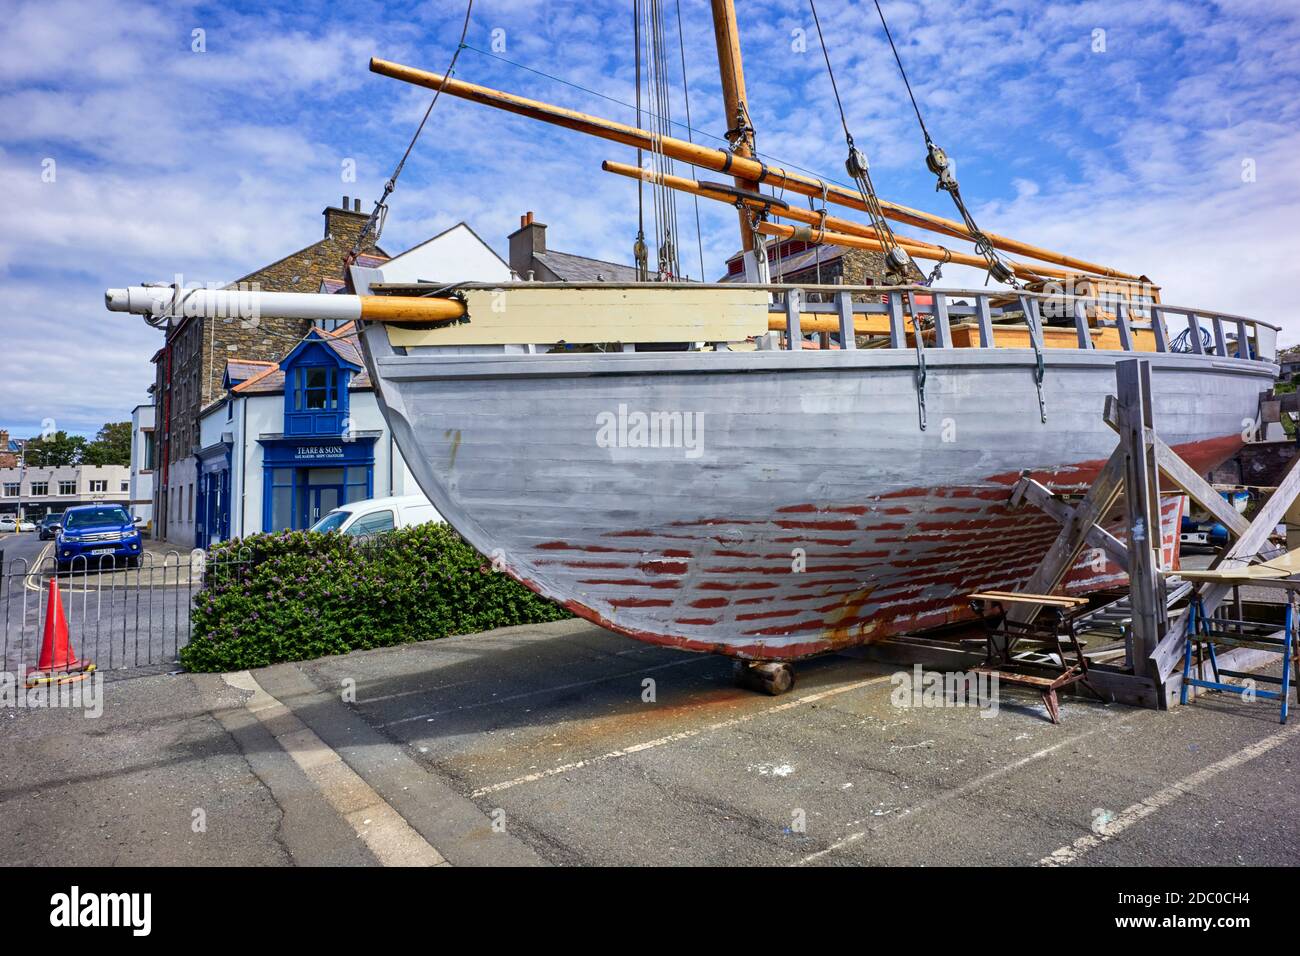 Manx Nobby fishing boat White Heather undergoing refurbishment on the quayside at Peel, Isle of Man just a short distance from where she was first con Stock Photo